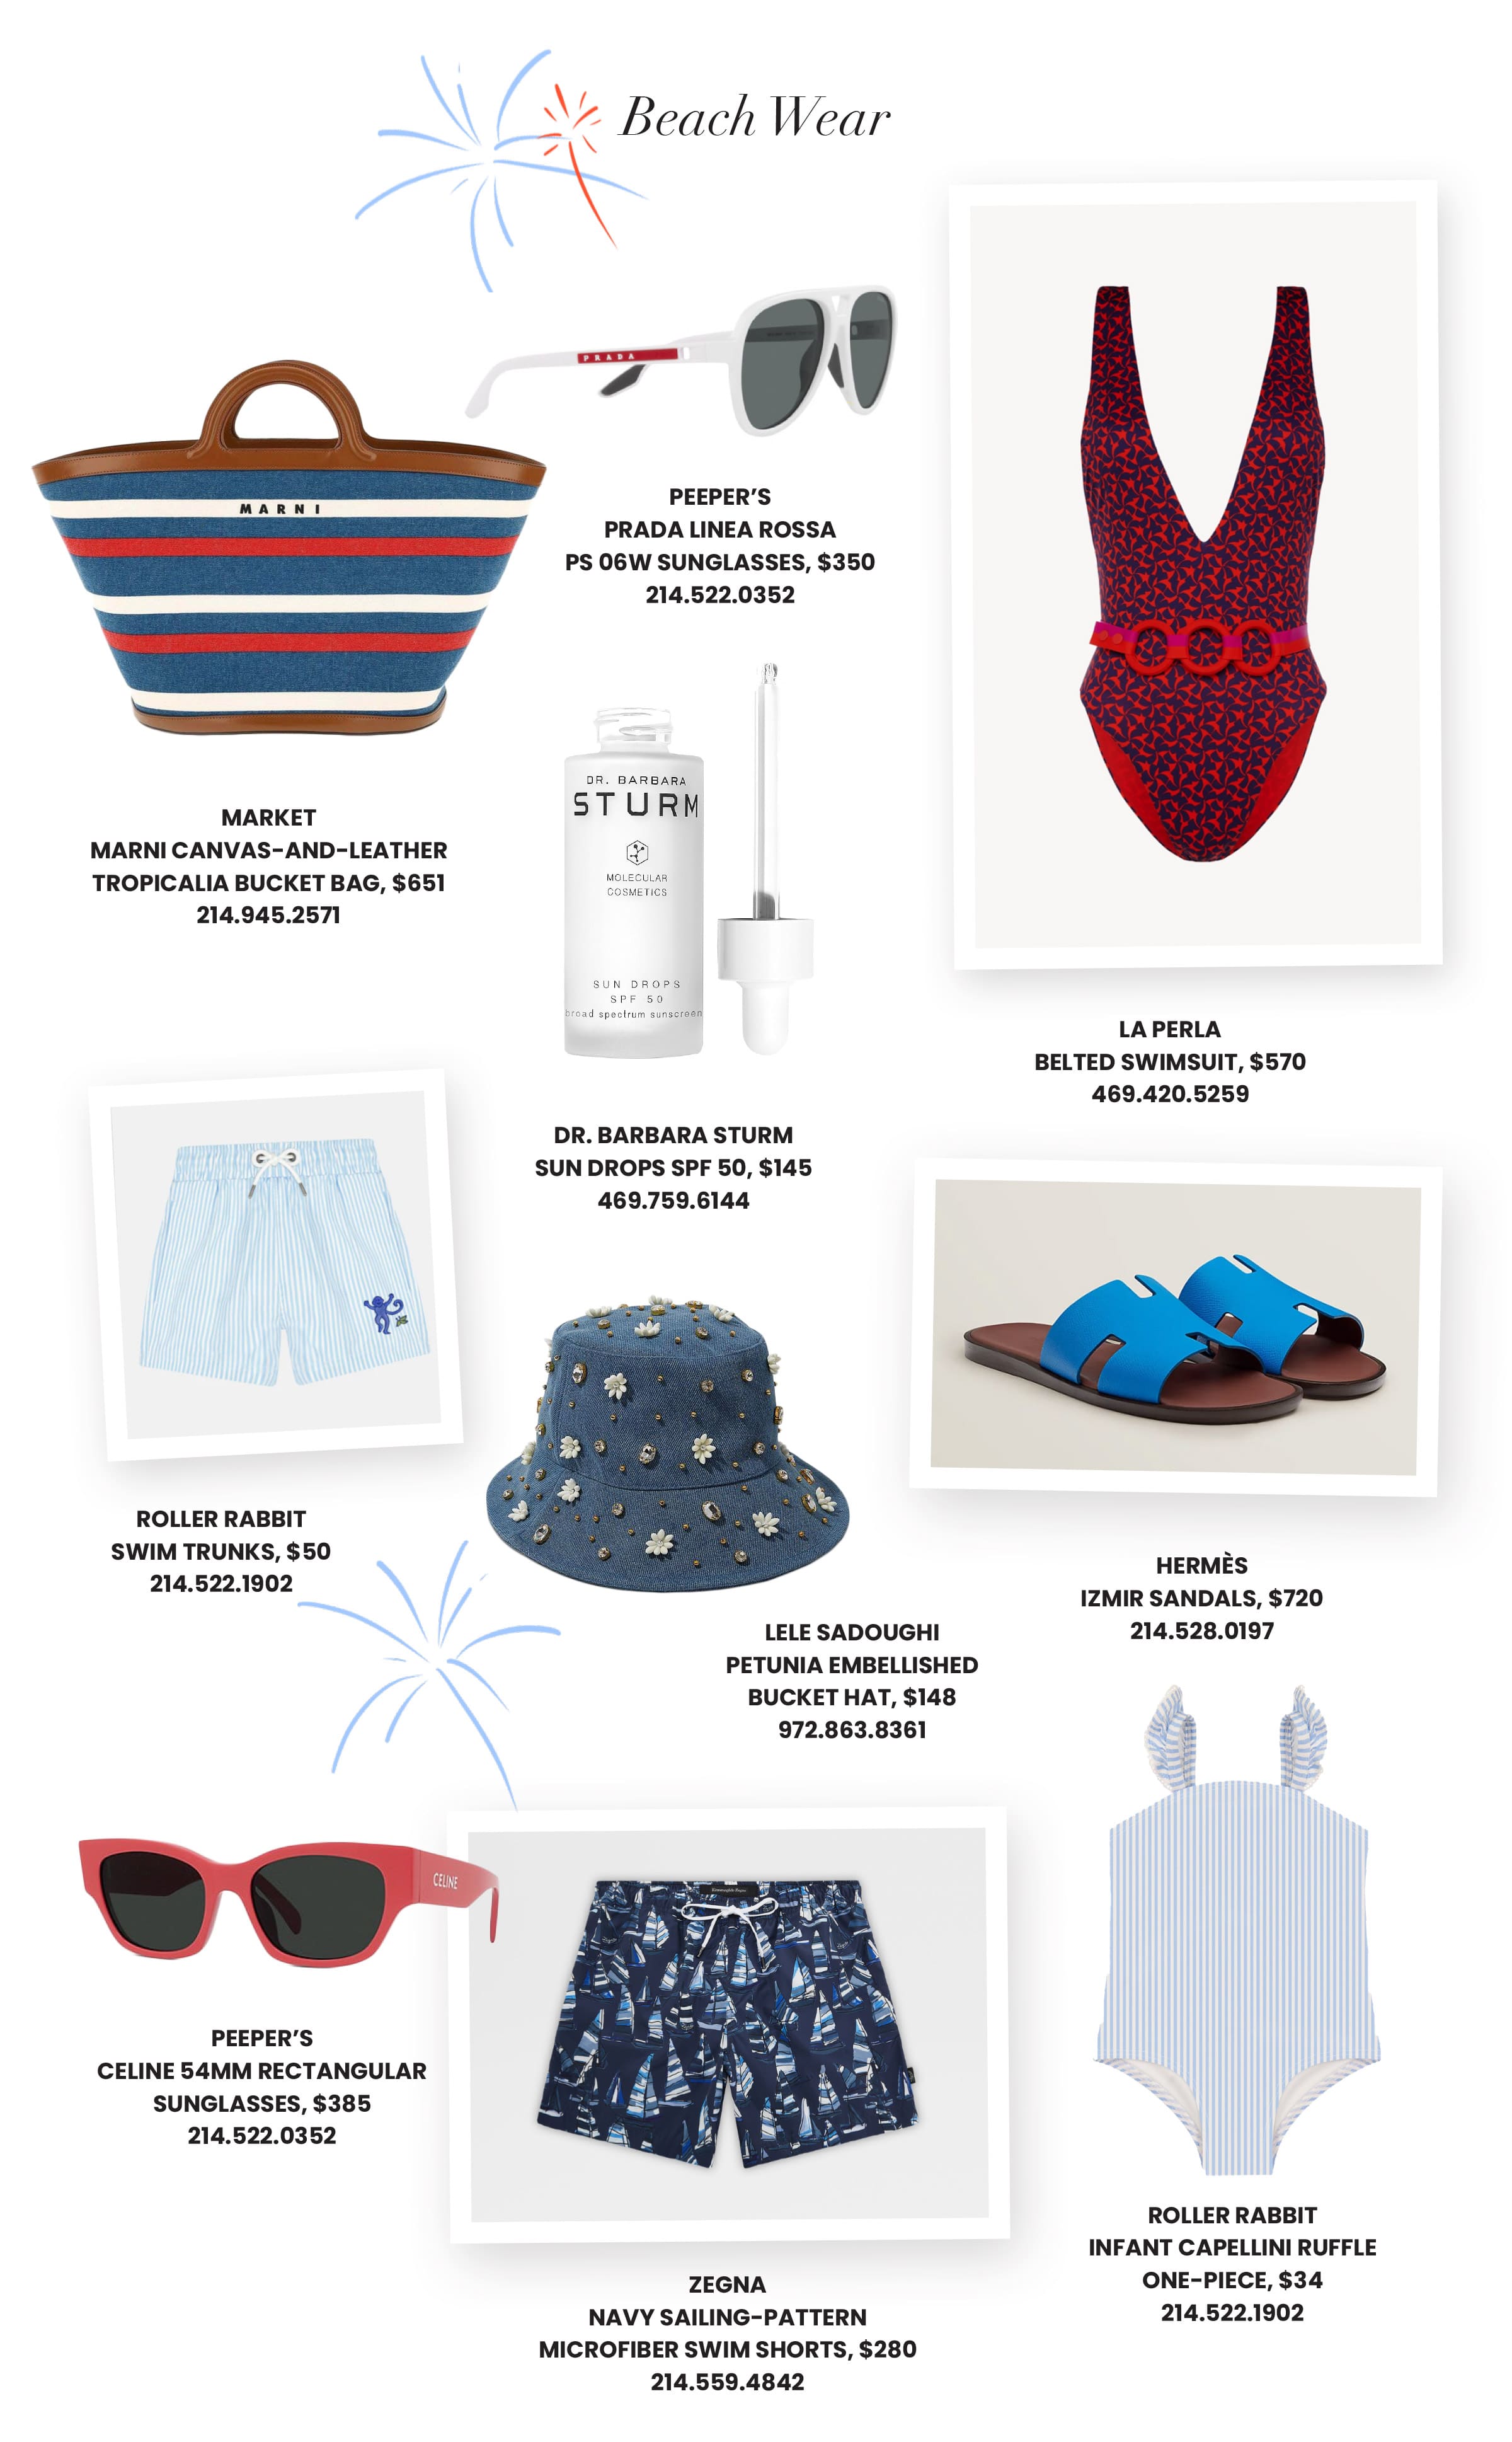 Fourth of July beach wear featuring swimsuits, sunglasses, hats, and sandals